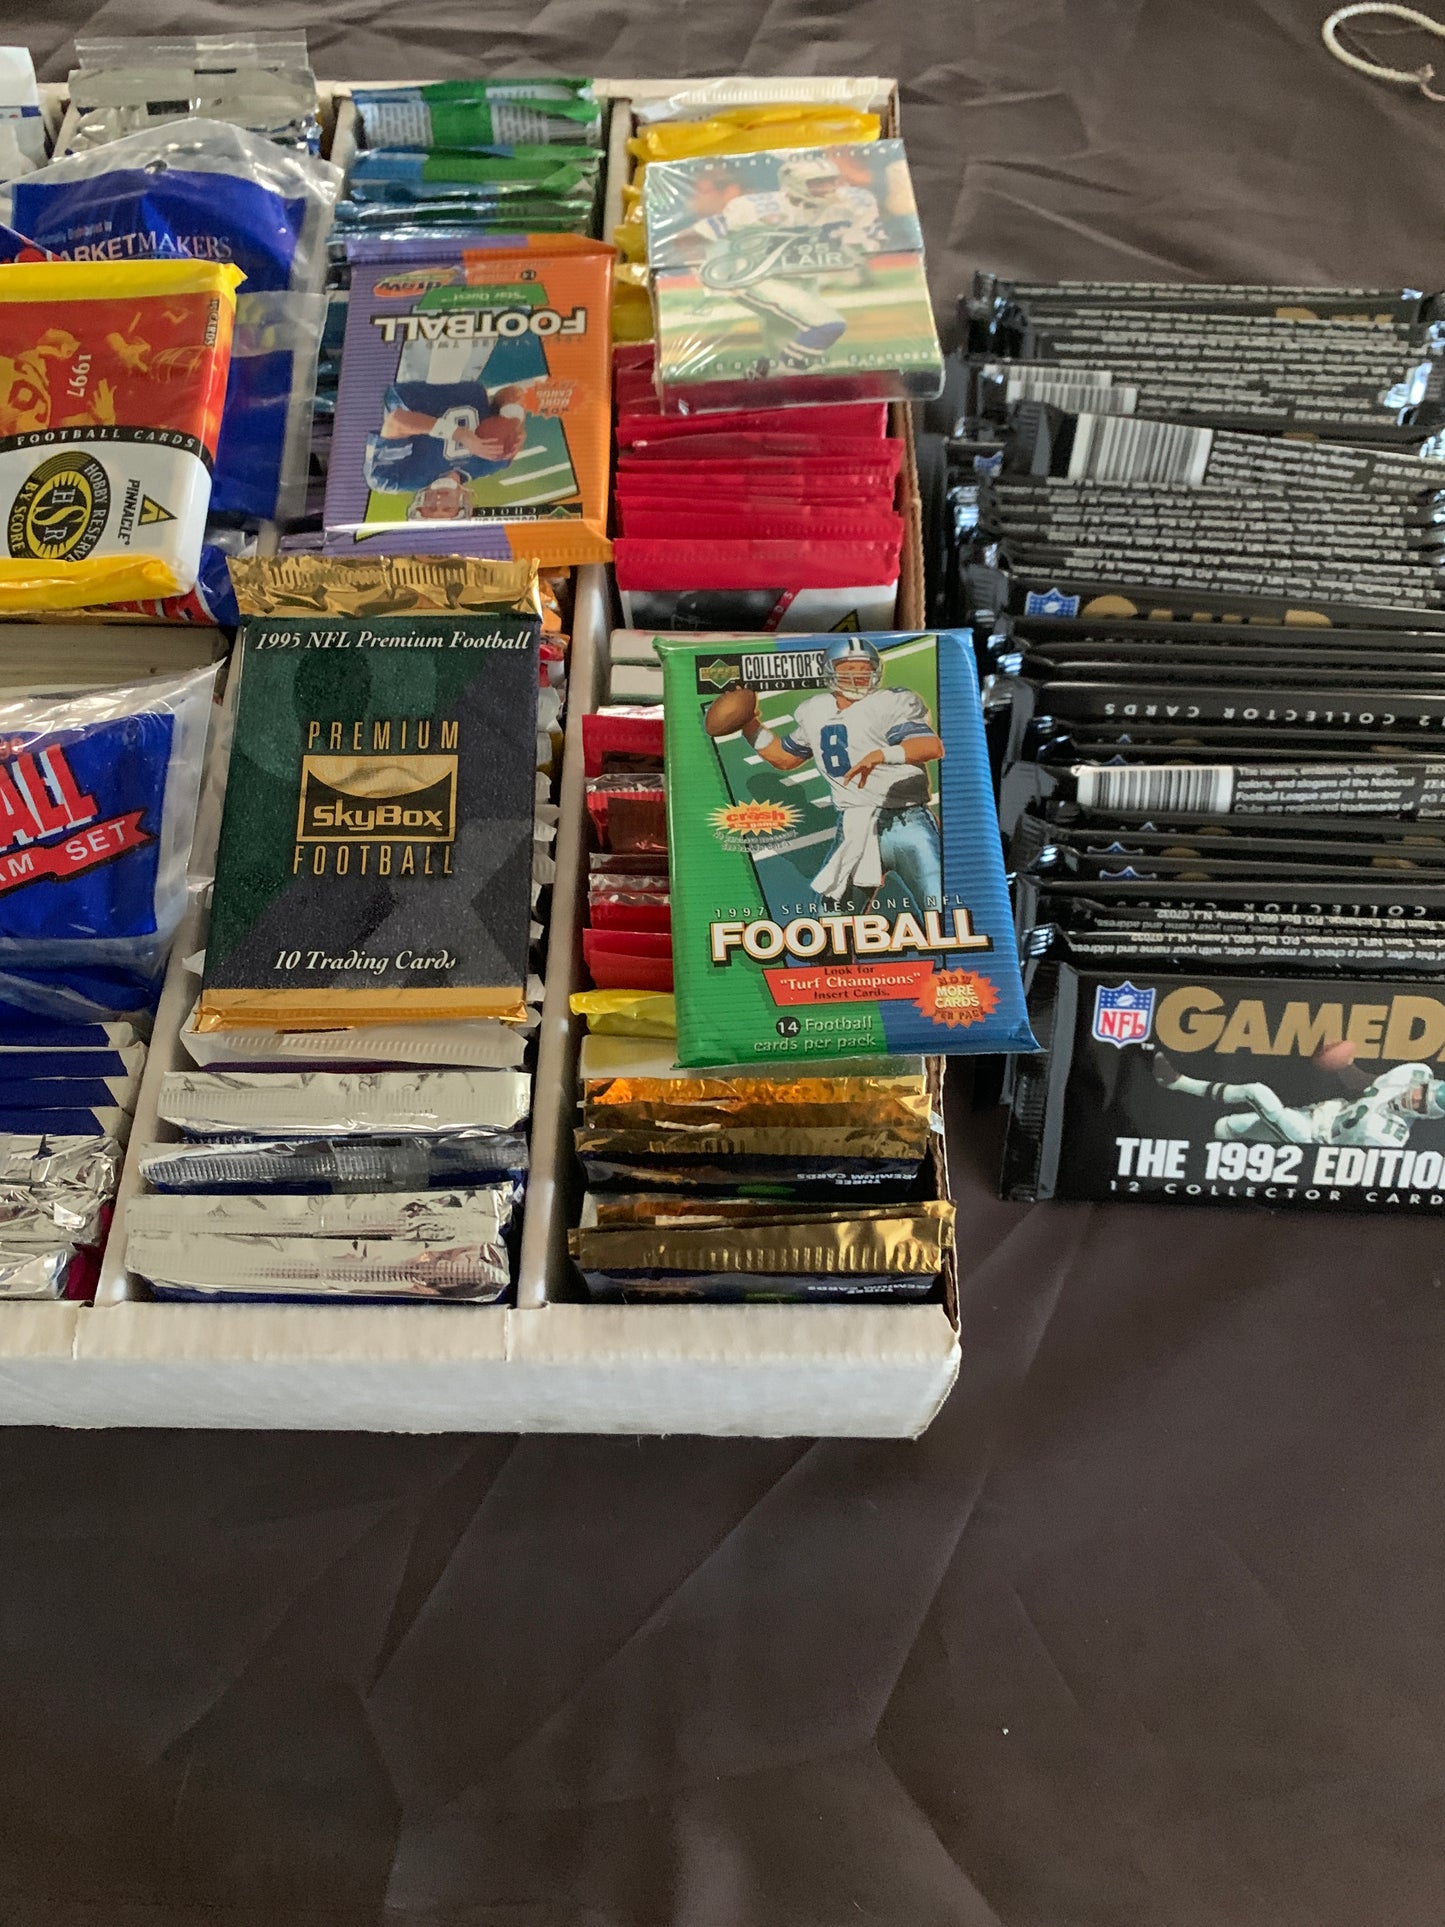 Wholesale Lot of Unopened FOOTBALL Cards in Wax Packs - Vintage 100 Card Lot